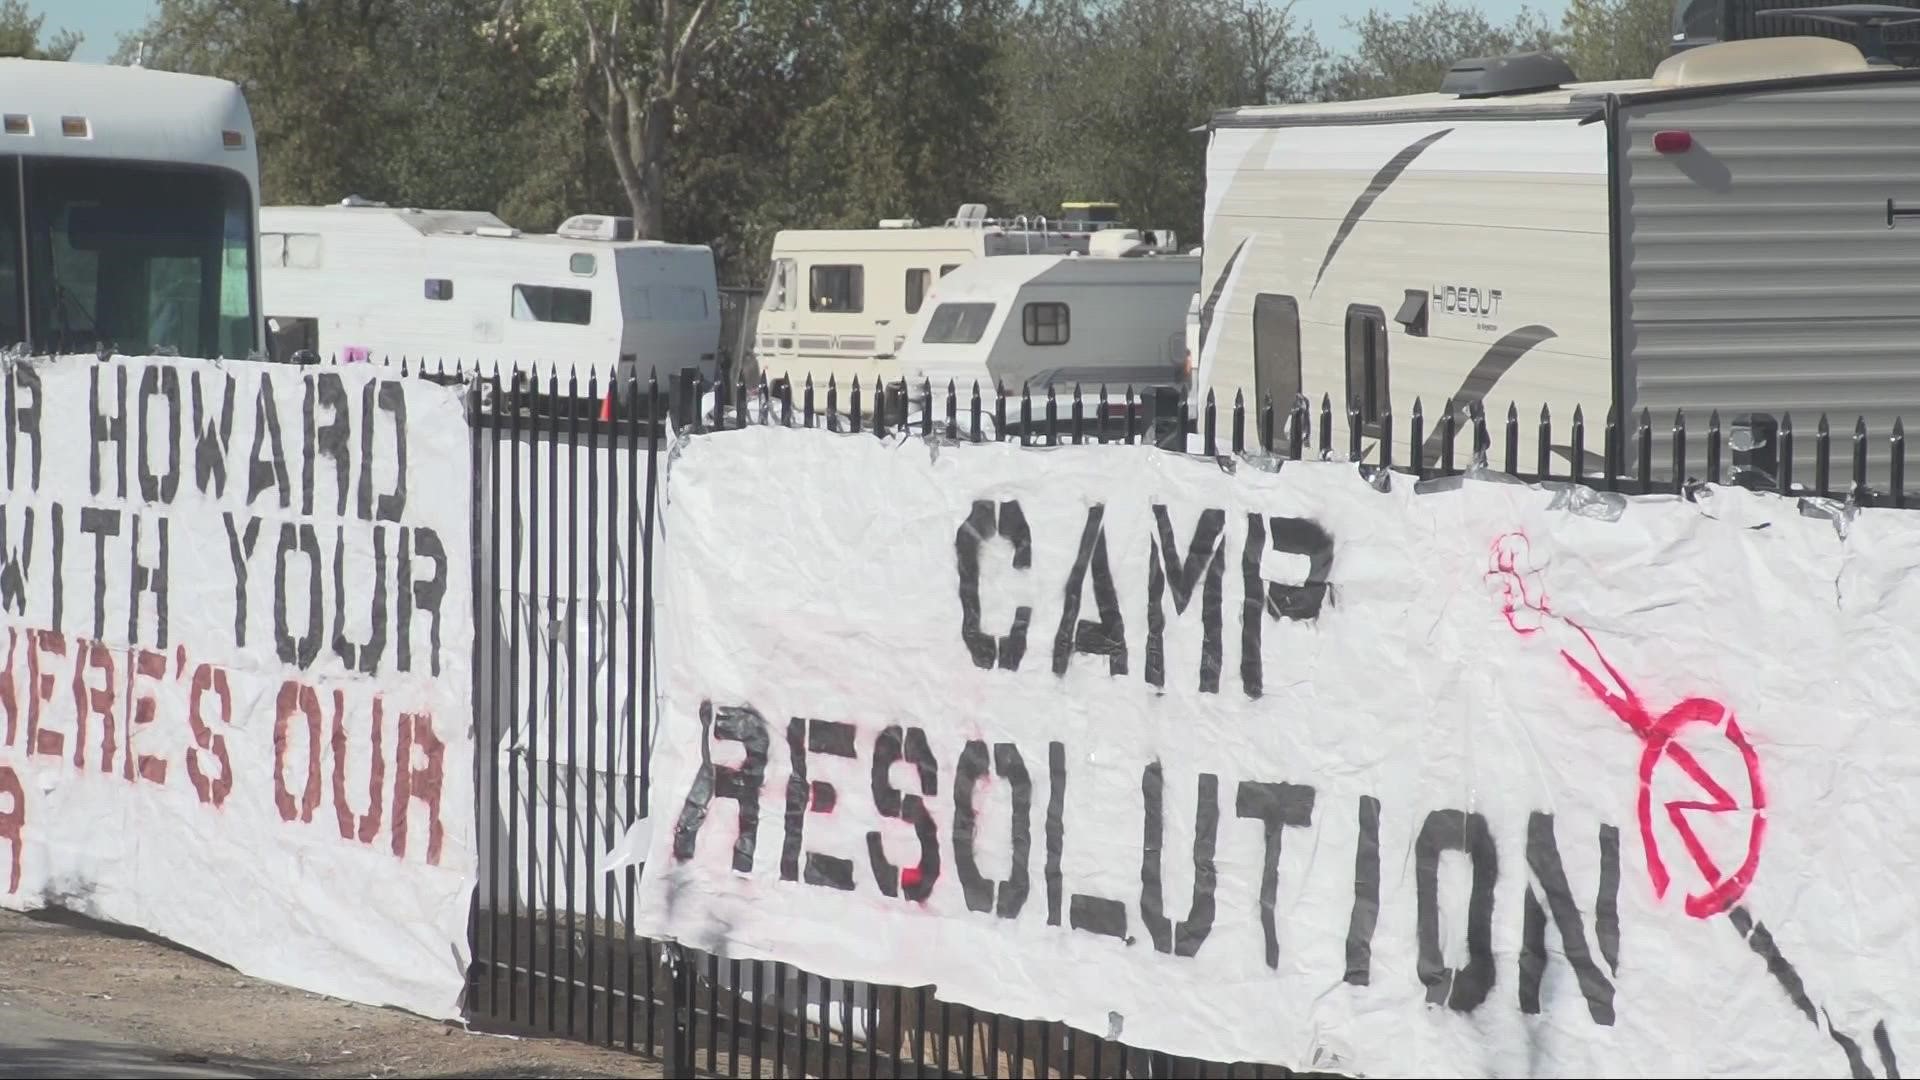 People living at the so-called Camp Resolution in Sacramento are worried that their encampments might be removed.